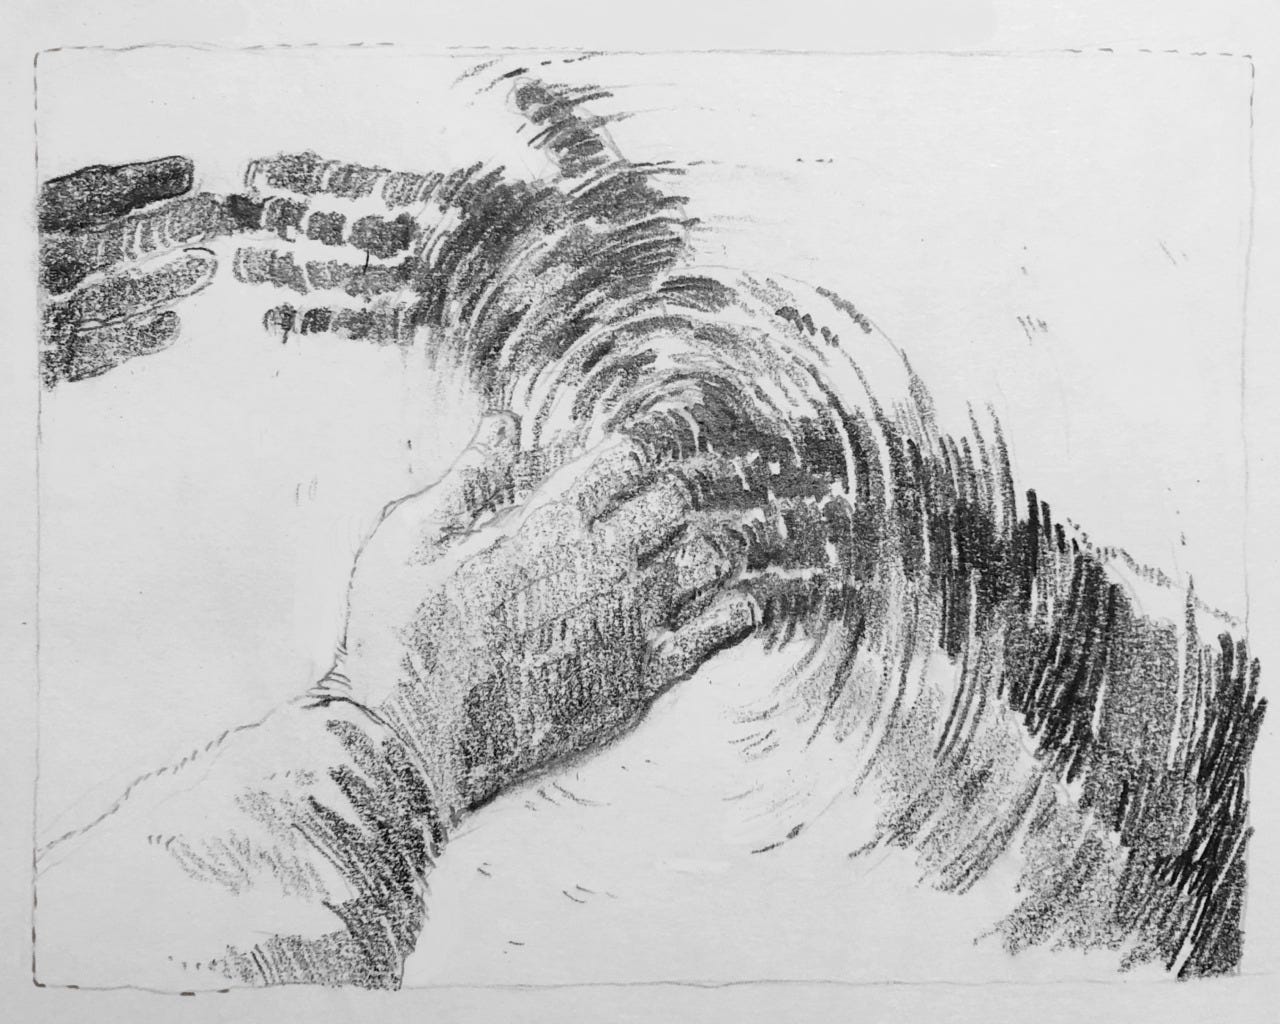 a pencil sketch of a hand reaching into what looks like a mirror, but like water, the hand disappears into the mirror. there is a shadow of the hand like a reflection as well.